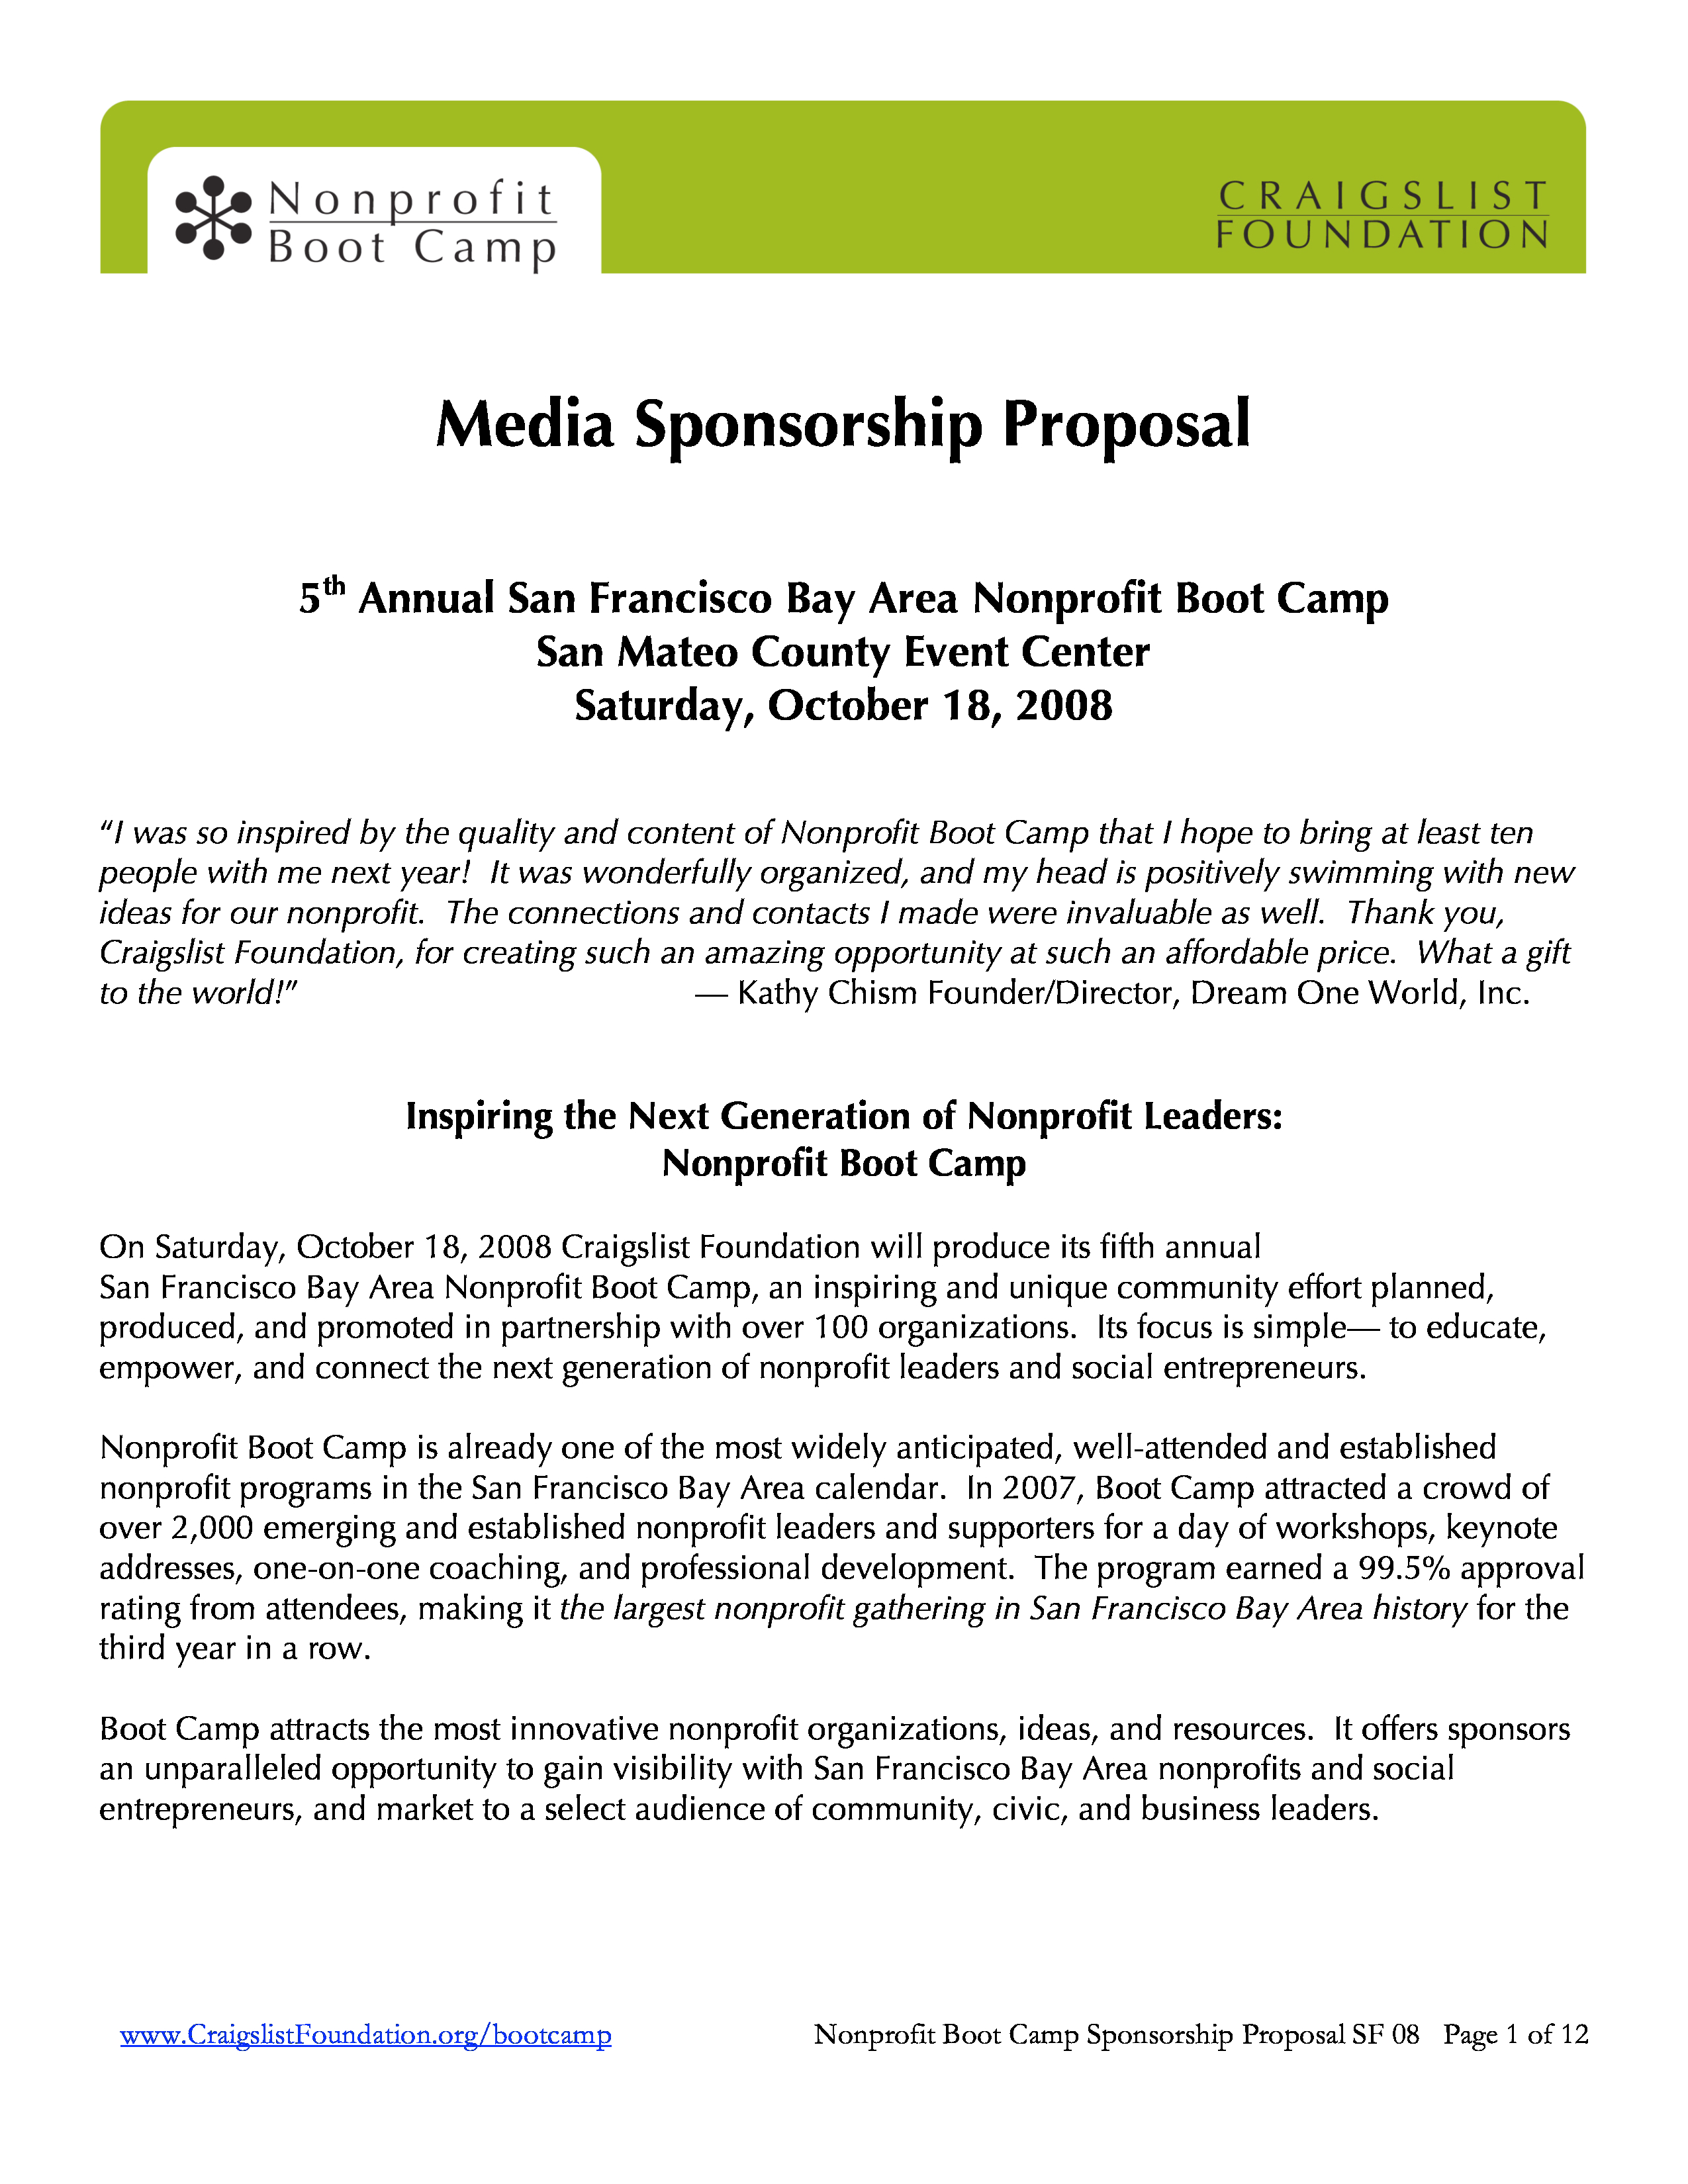 Free Media Sponsorship Proposal Templates At Allbusinesstemplates in dimensions 2550 X 3300